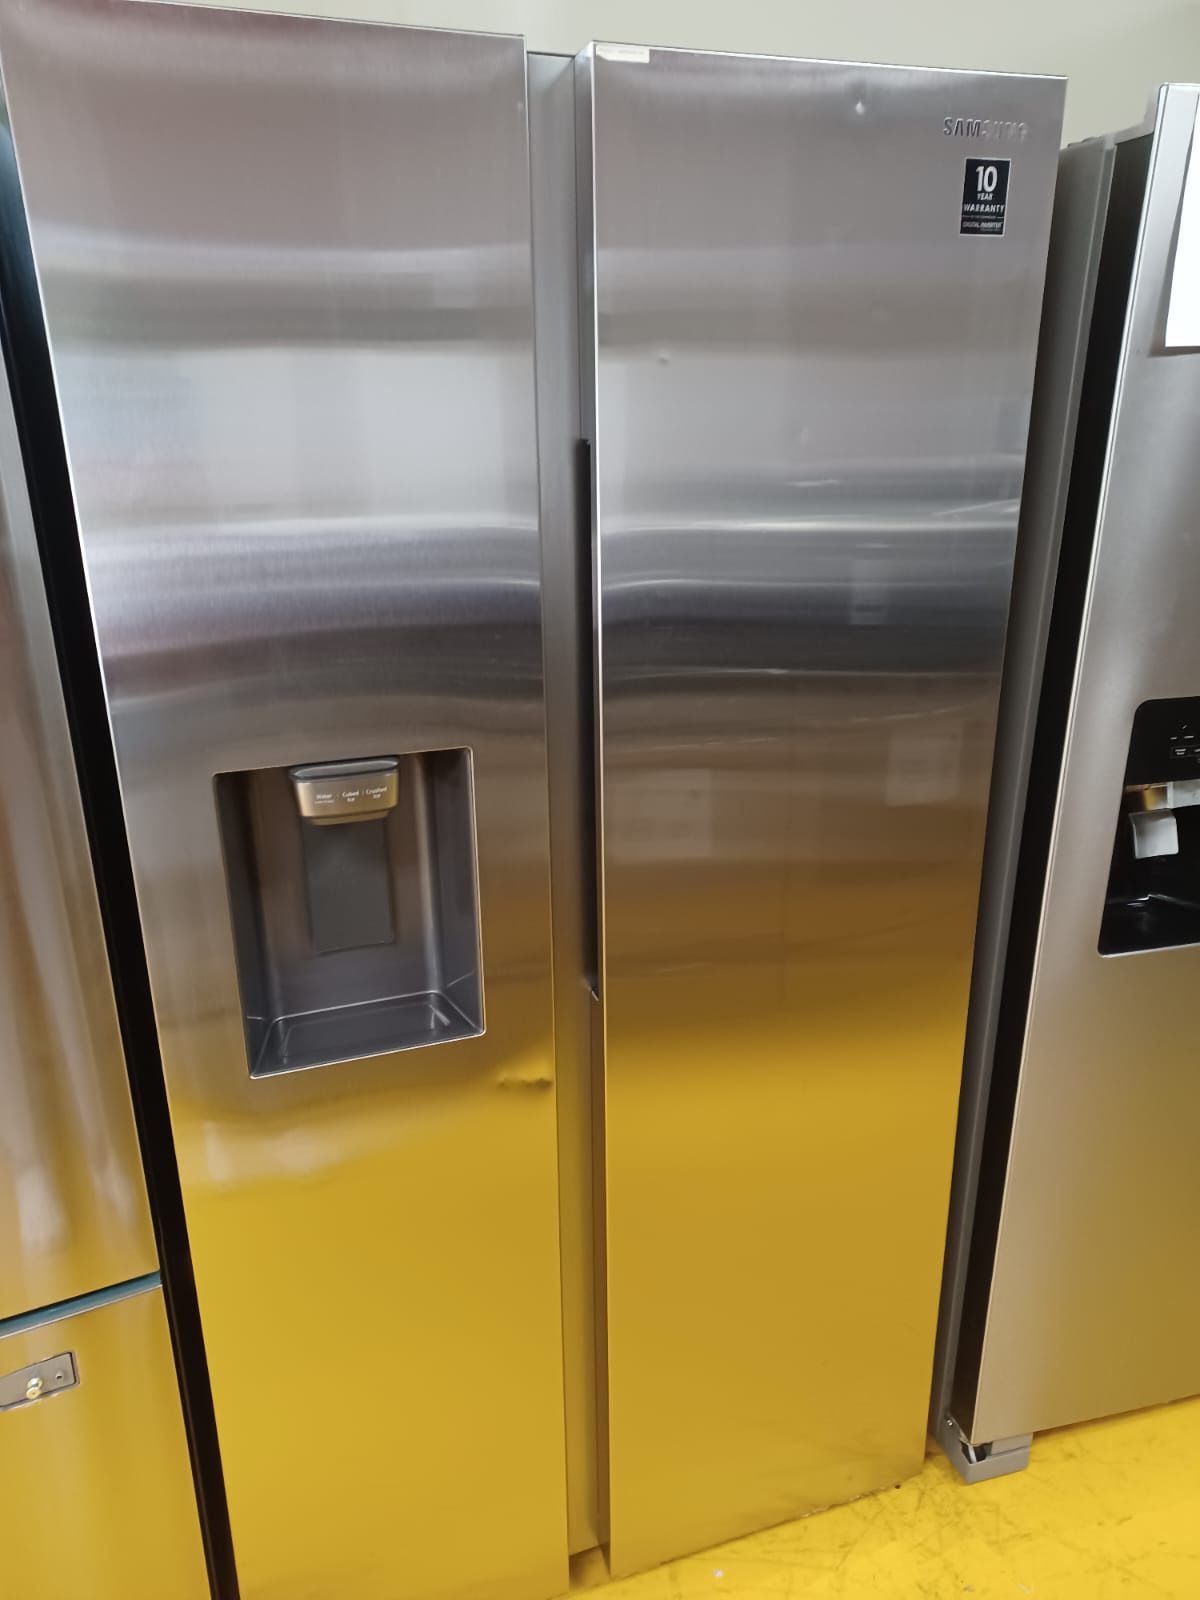 BRAND NEW SAMSUNG STAINLESS STEEL SIDE BY SIDE REFRIGERATOR 